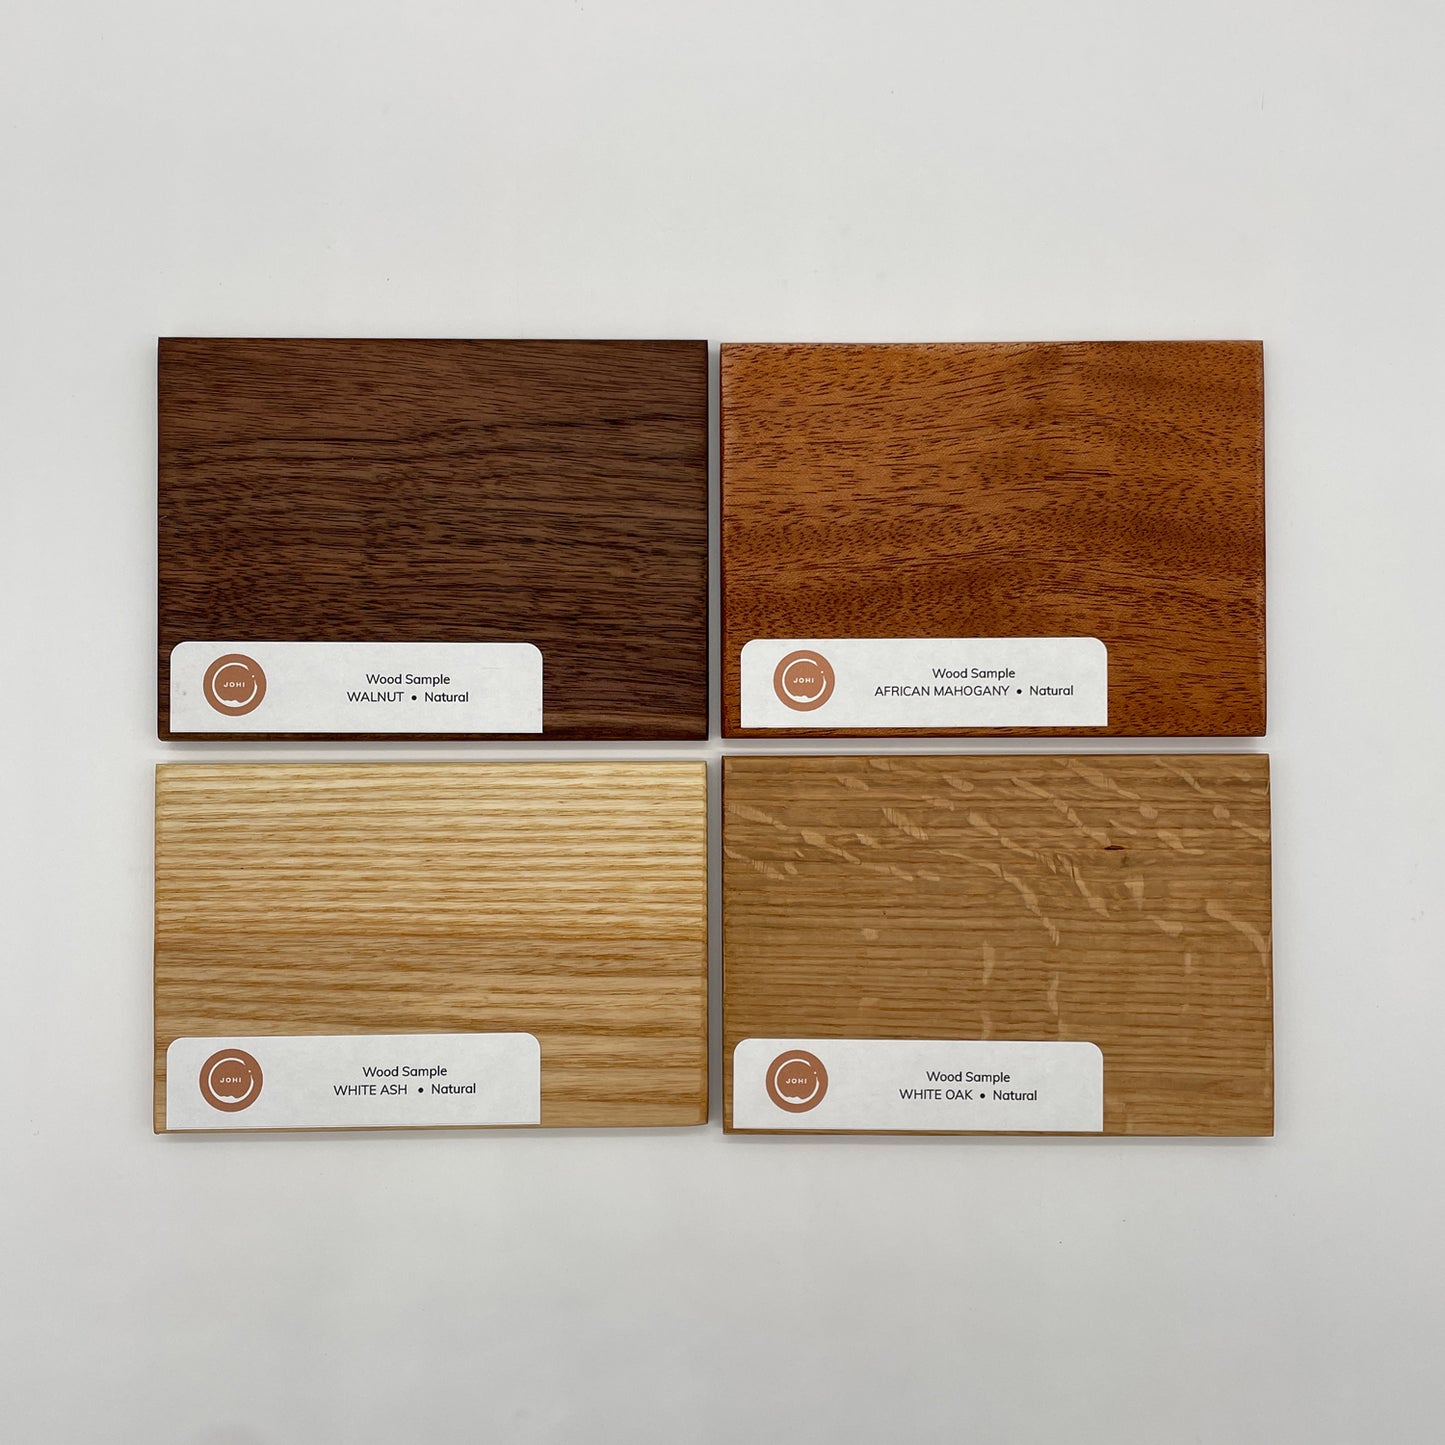 Wood and finish samples